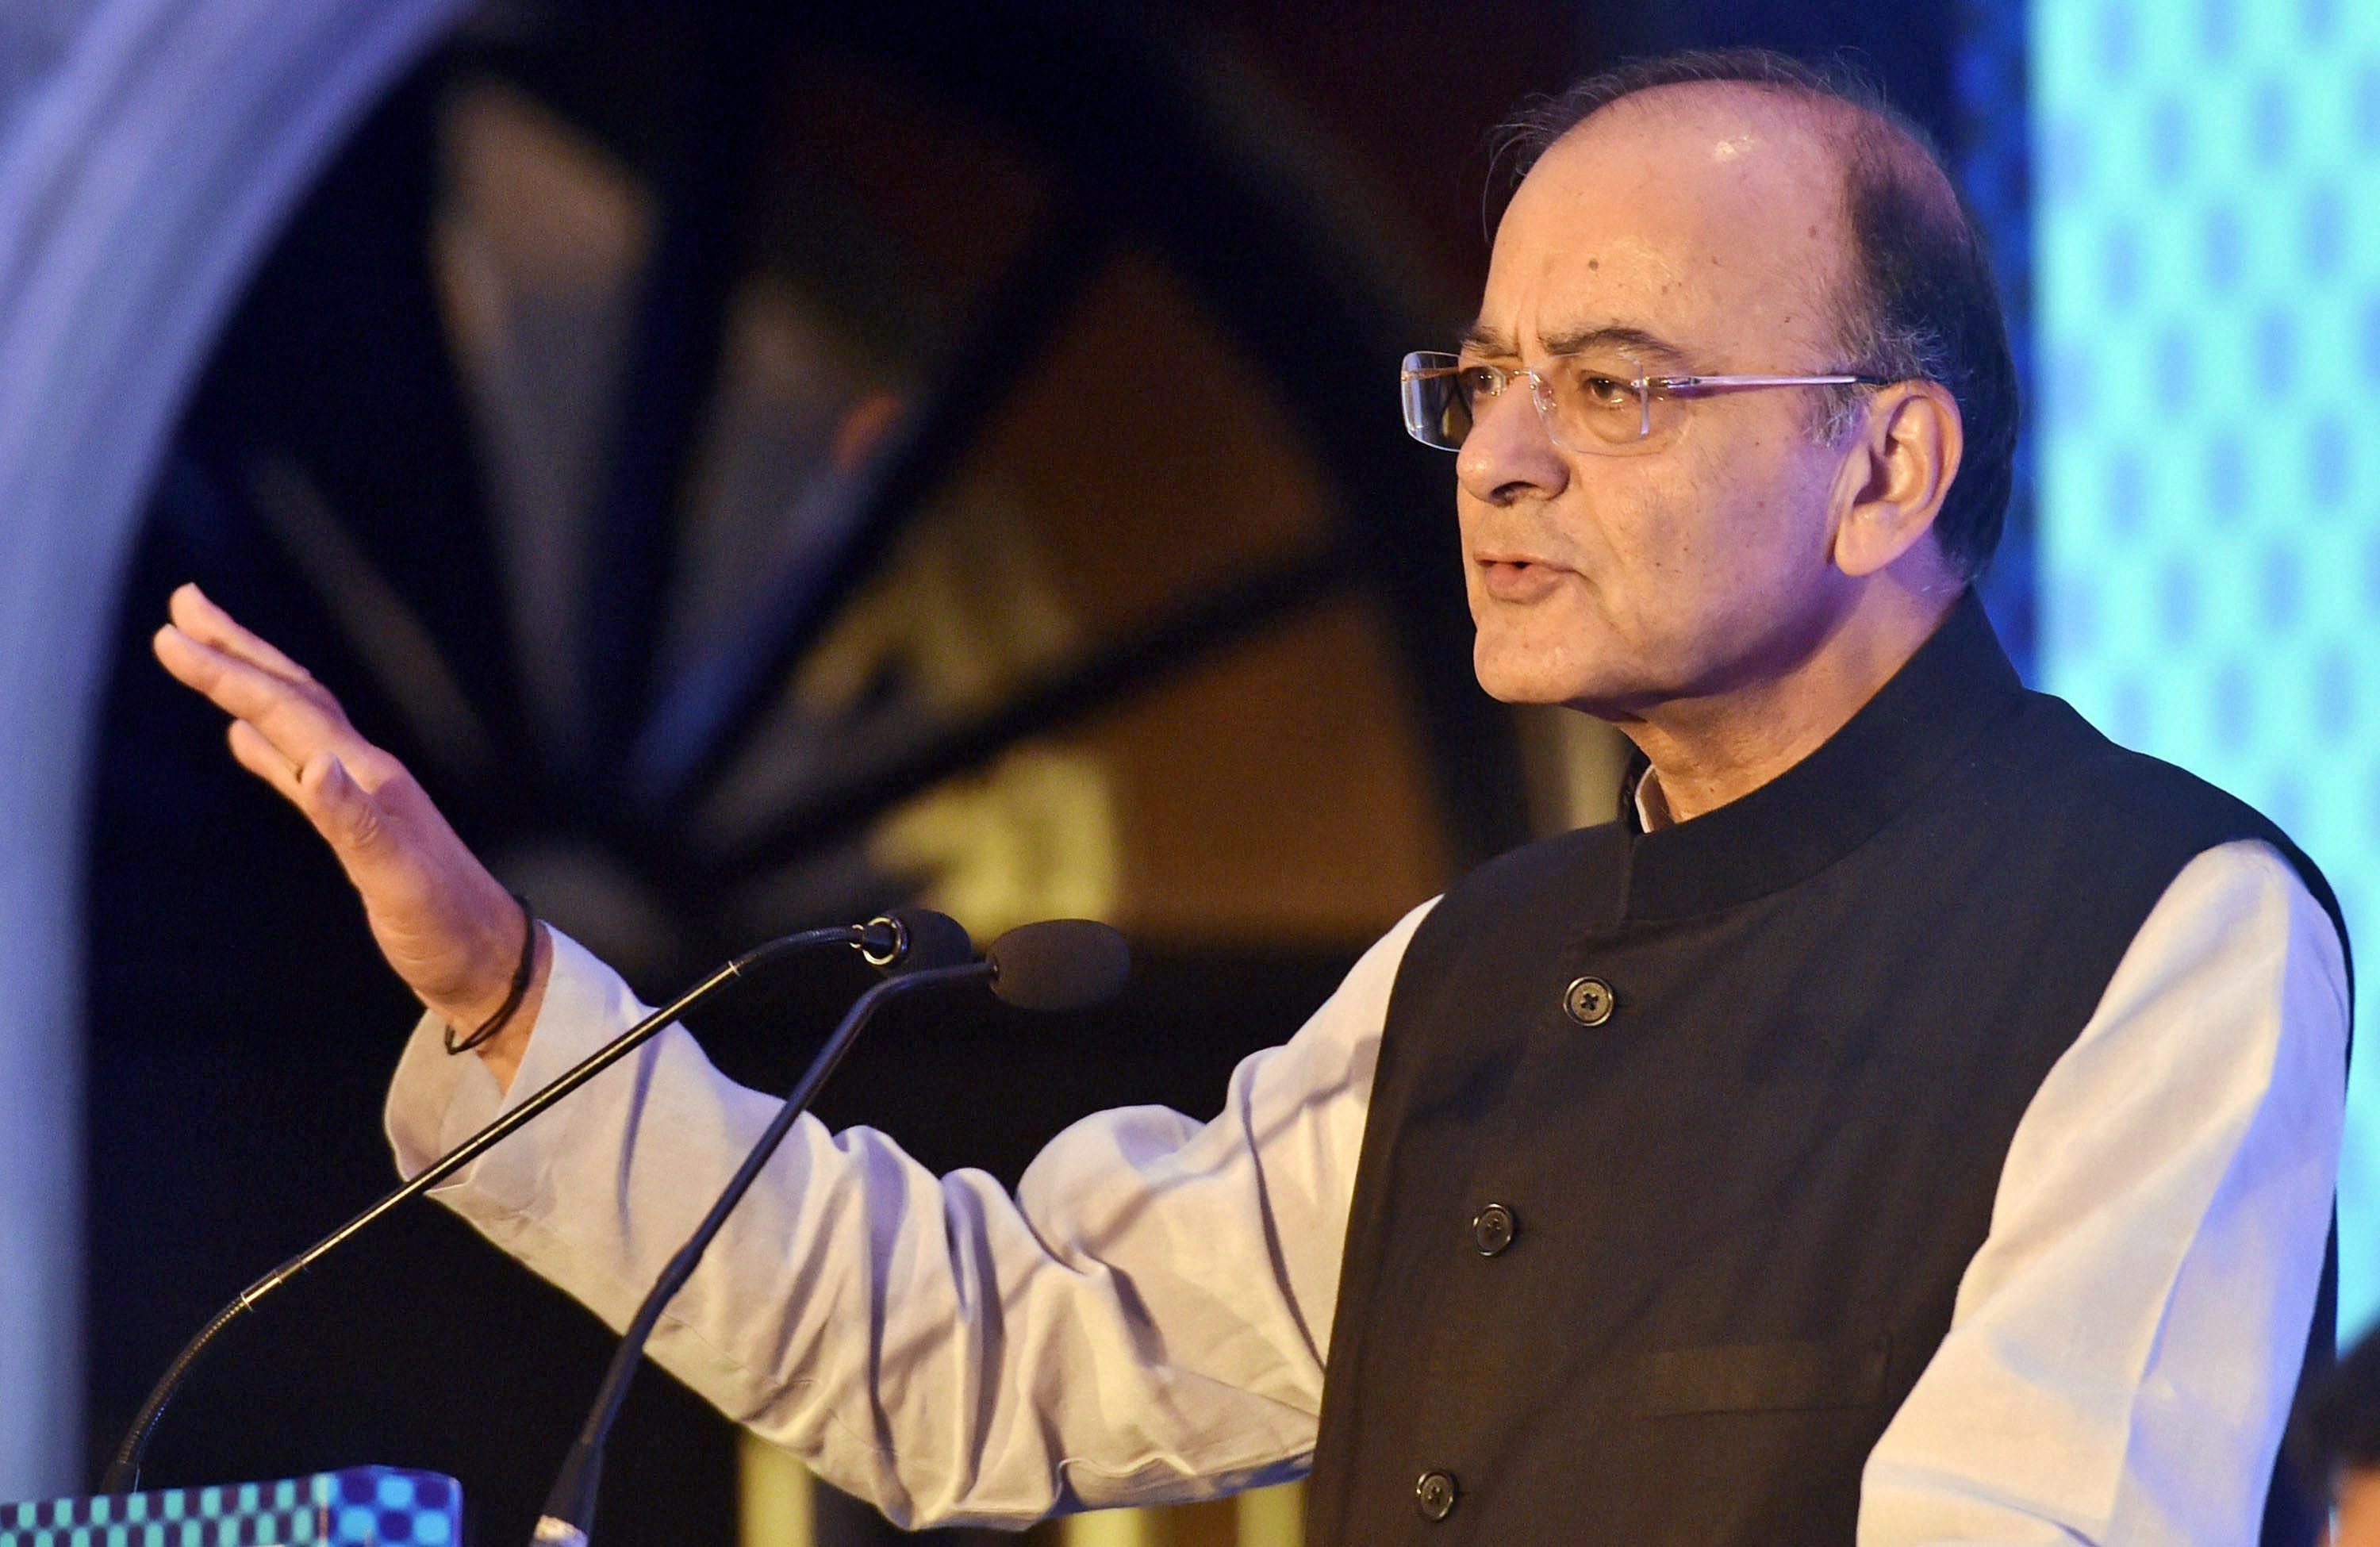 Post note ban, separatists, Maoists feel 'fund-starved' in many parts of India: Jaitley